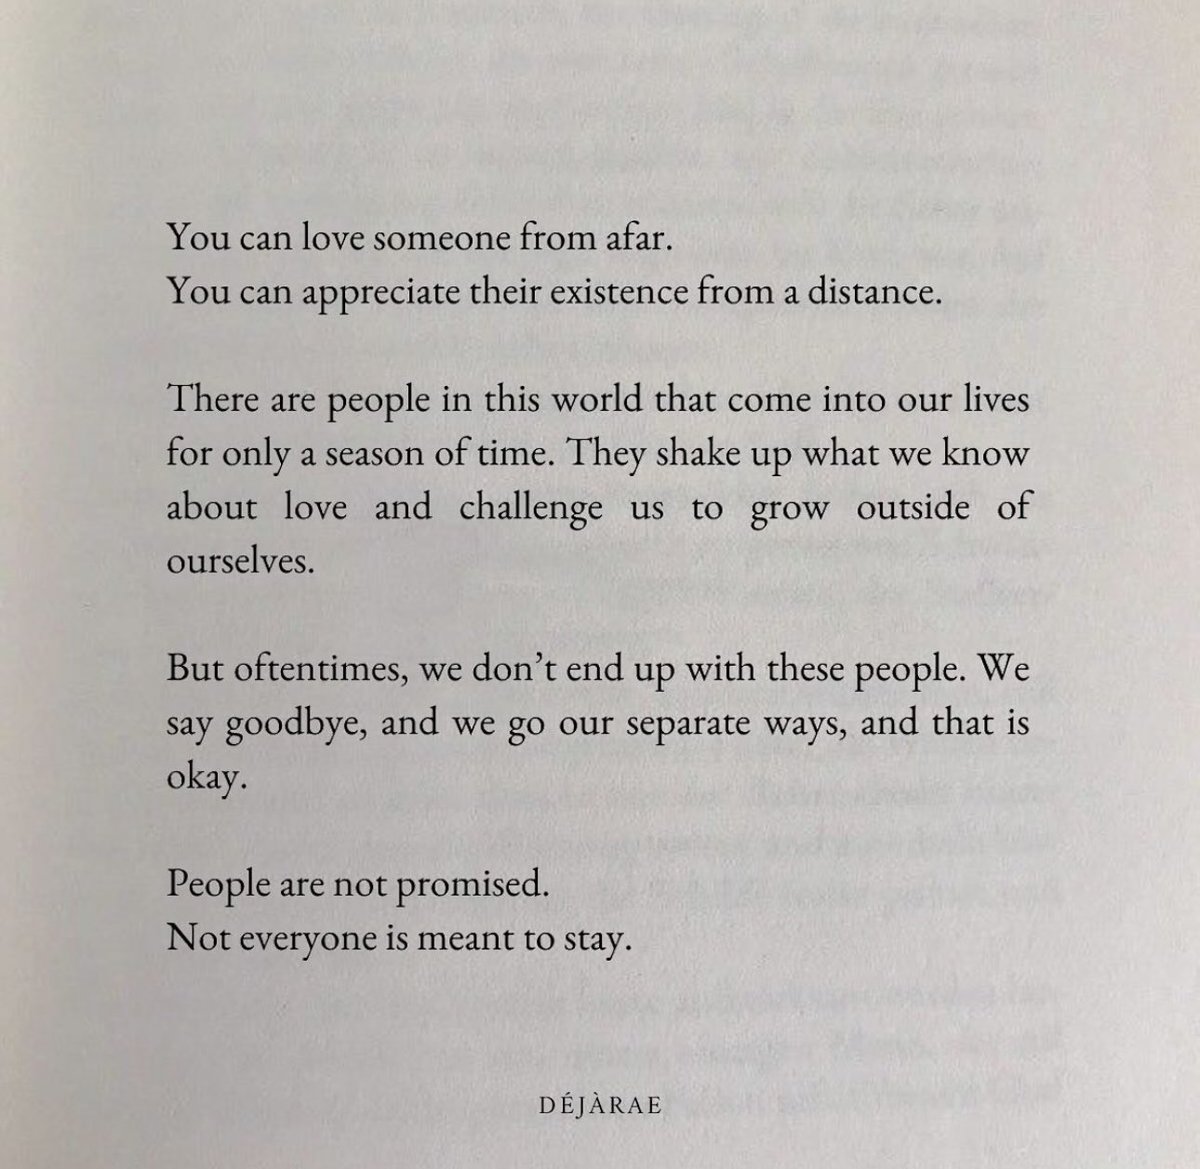 You can love someone from afar. People are not promised. Not everyone is meant to stay. Words by Déjà Rae